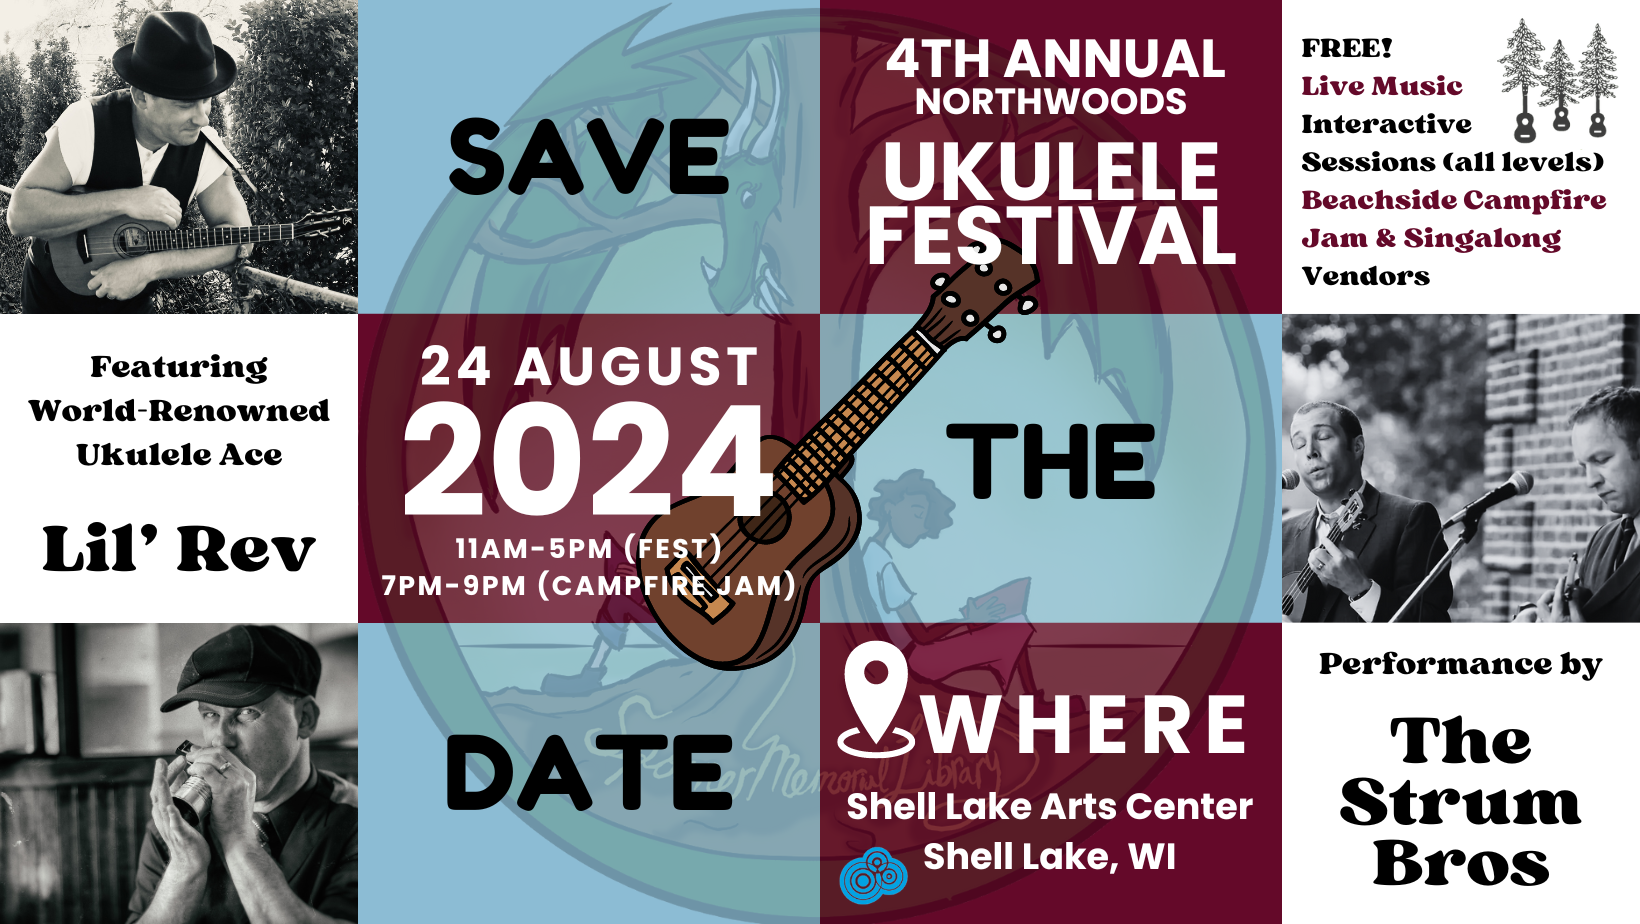 decorative banner announcing the 4th annual Northwoods Ukulele Festival